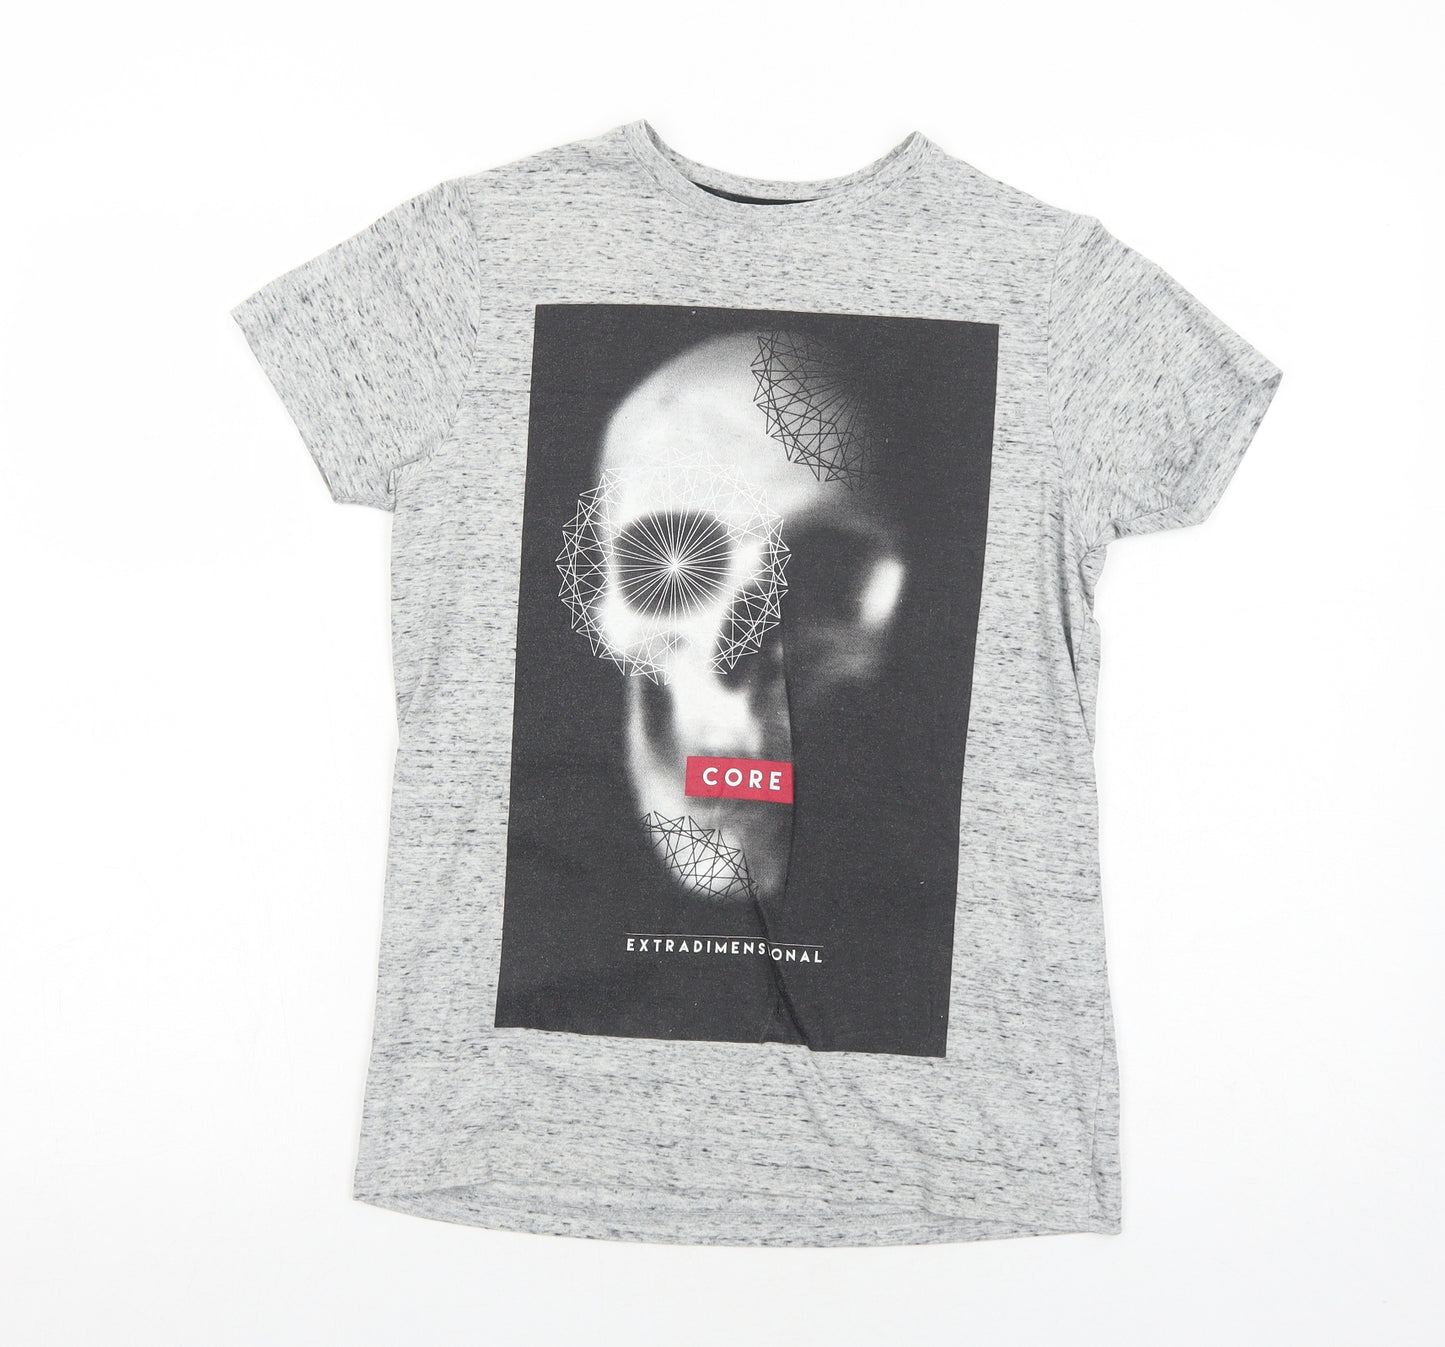 Primark Boys Grey Cotton Pullover T-Shirt Size 11-12 Years Crew Neck Pullover - Skull